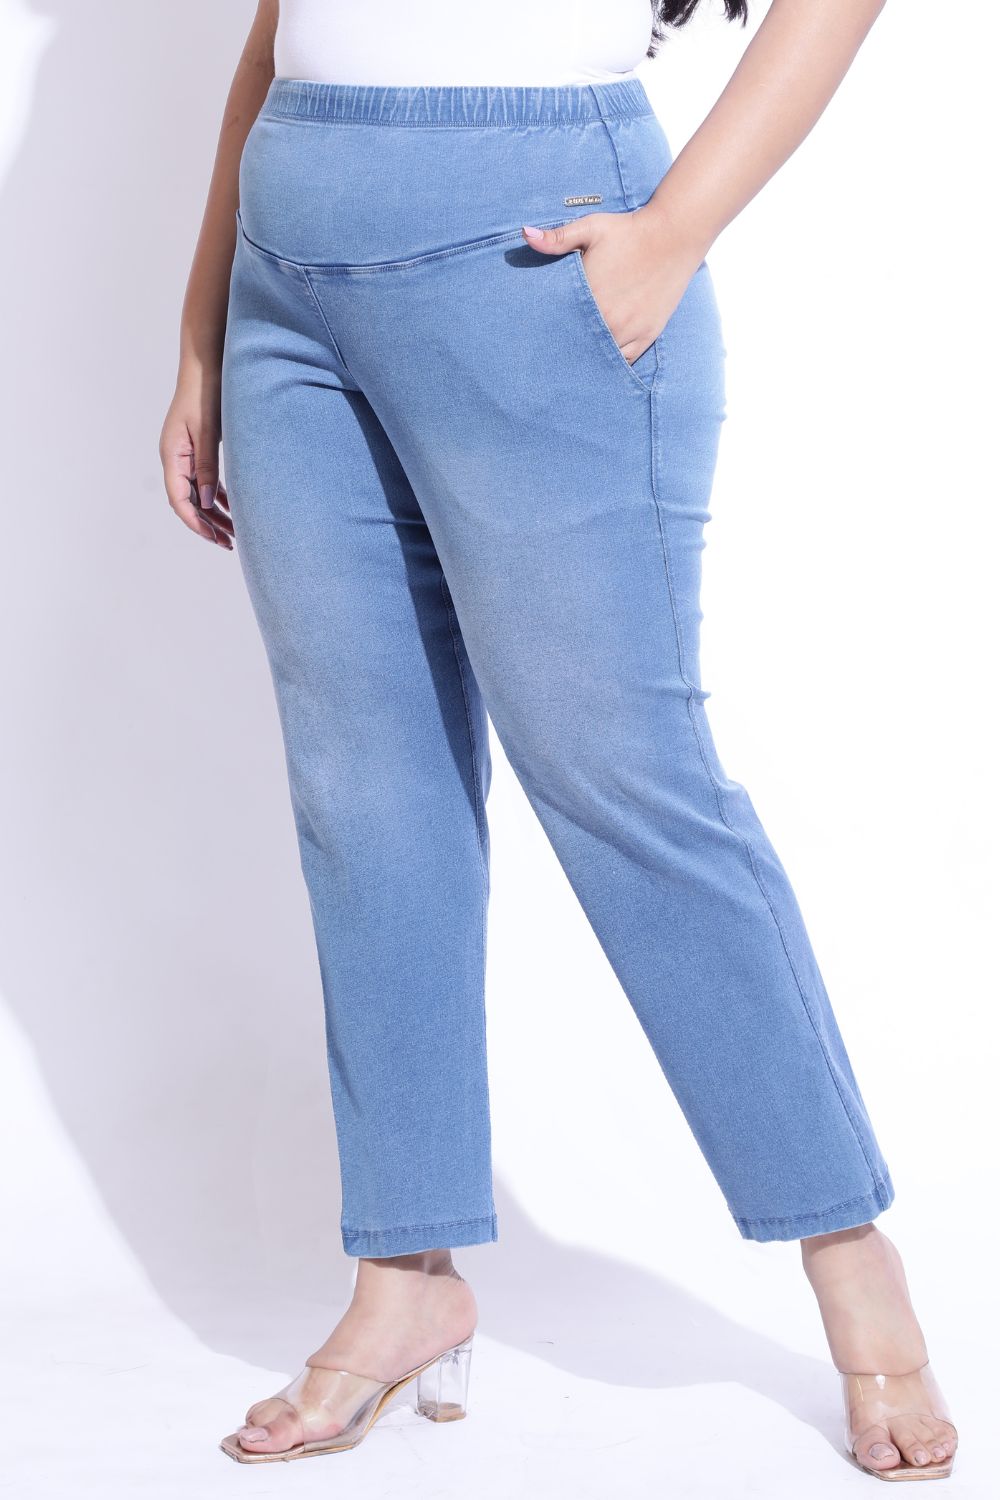 Blue Light Fade Straight Fit Jeans for Women